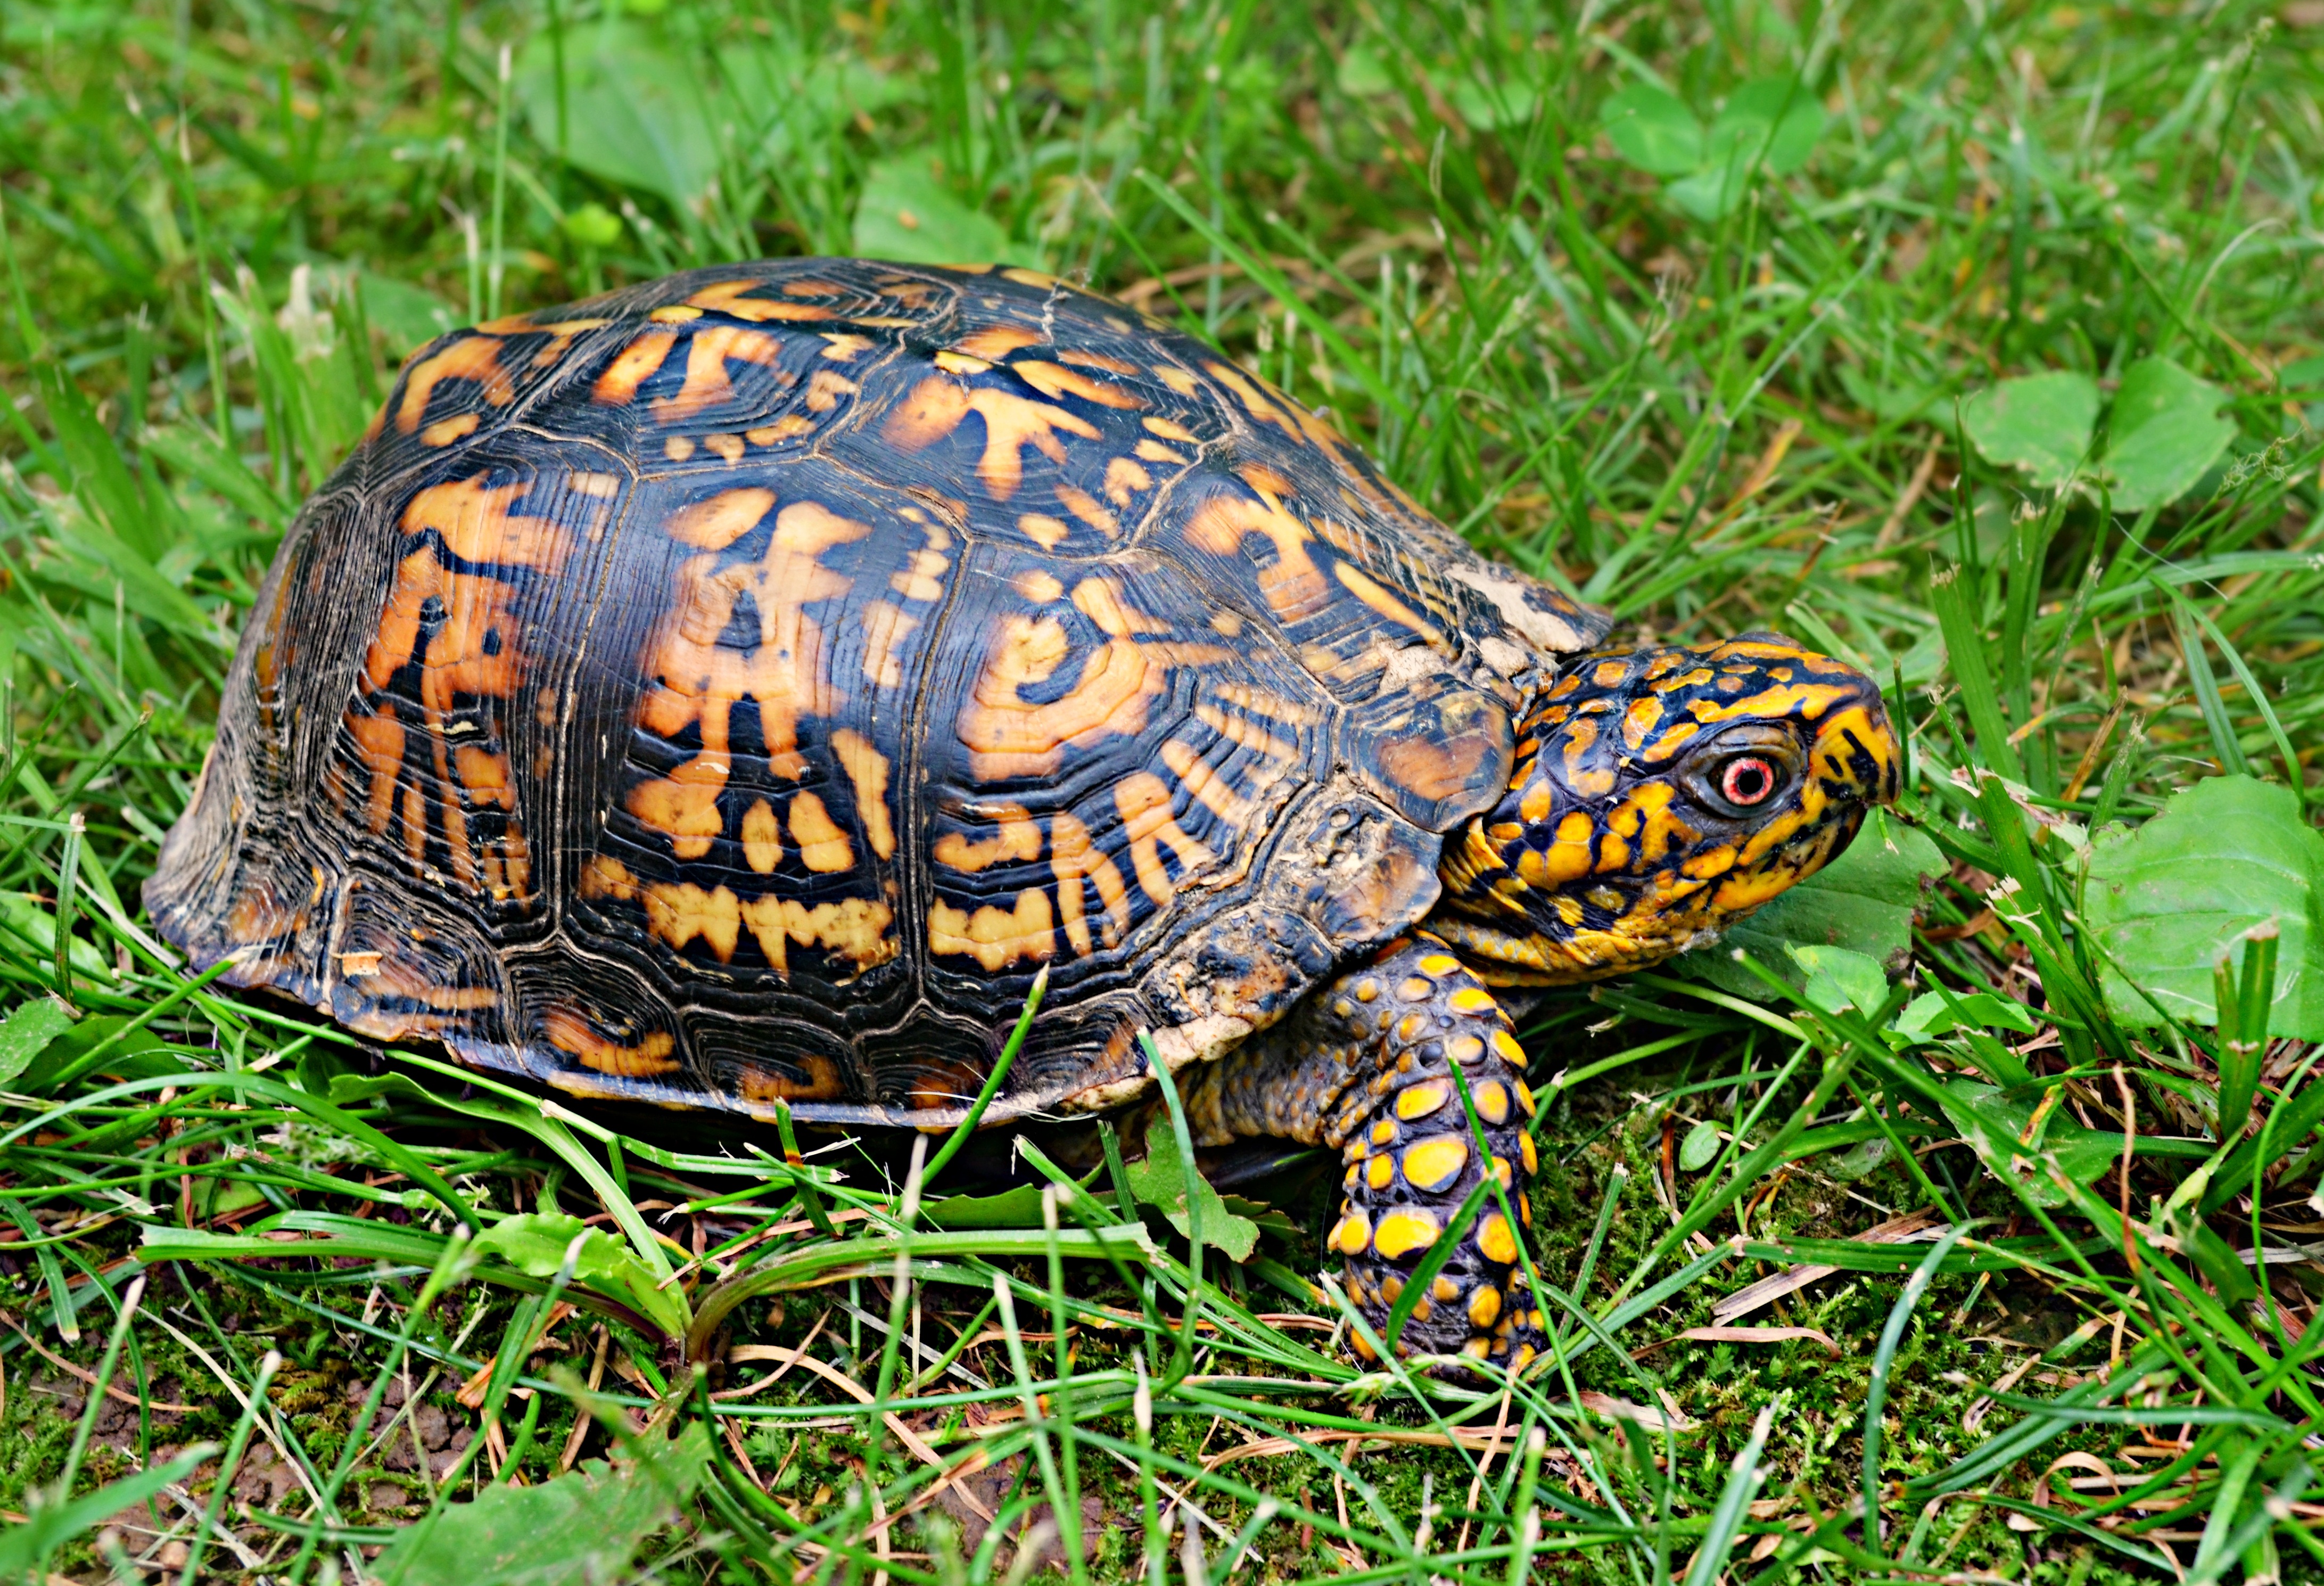 118065 Screensavers and Wallpapers Shell for phone. Download animals, grass, carapace, shell, turtle pictures for free